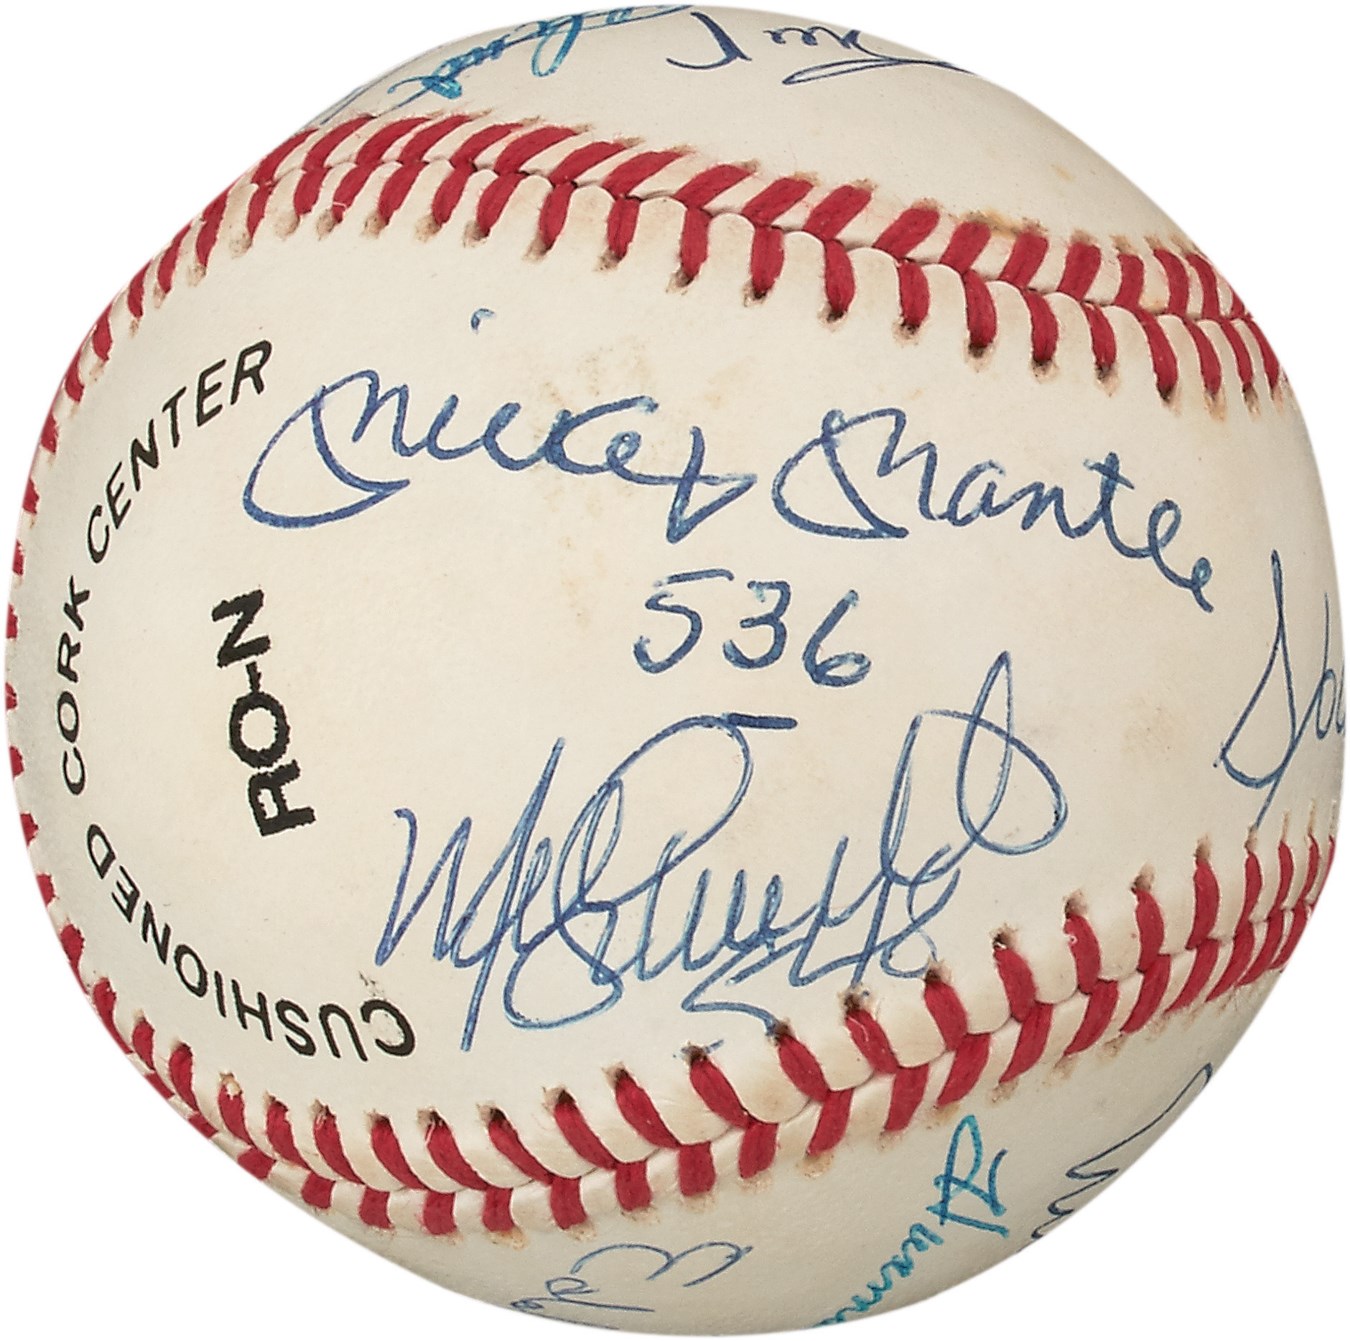 Baseball Autographs - 500 Home Run Club Signed Baseball with Home Run Totals - Signed by 12 inc: Mantle & Williams (PSA)